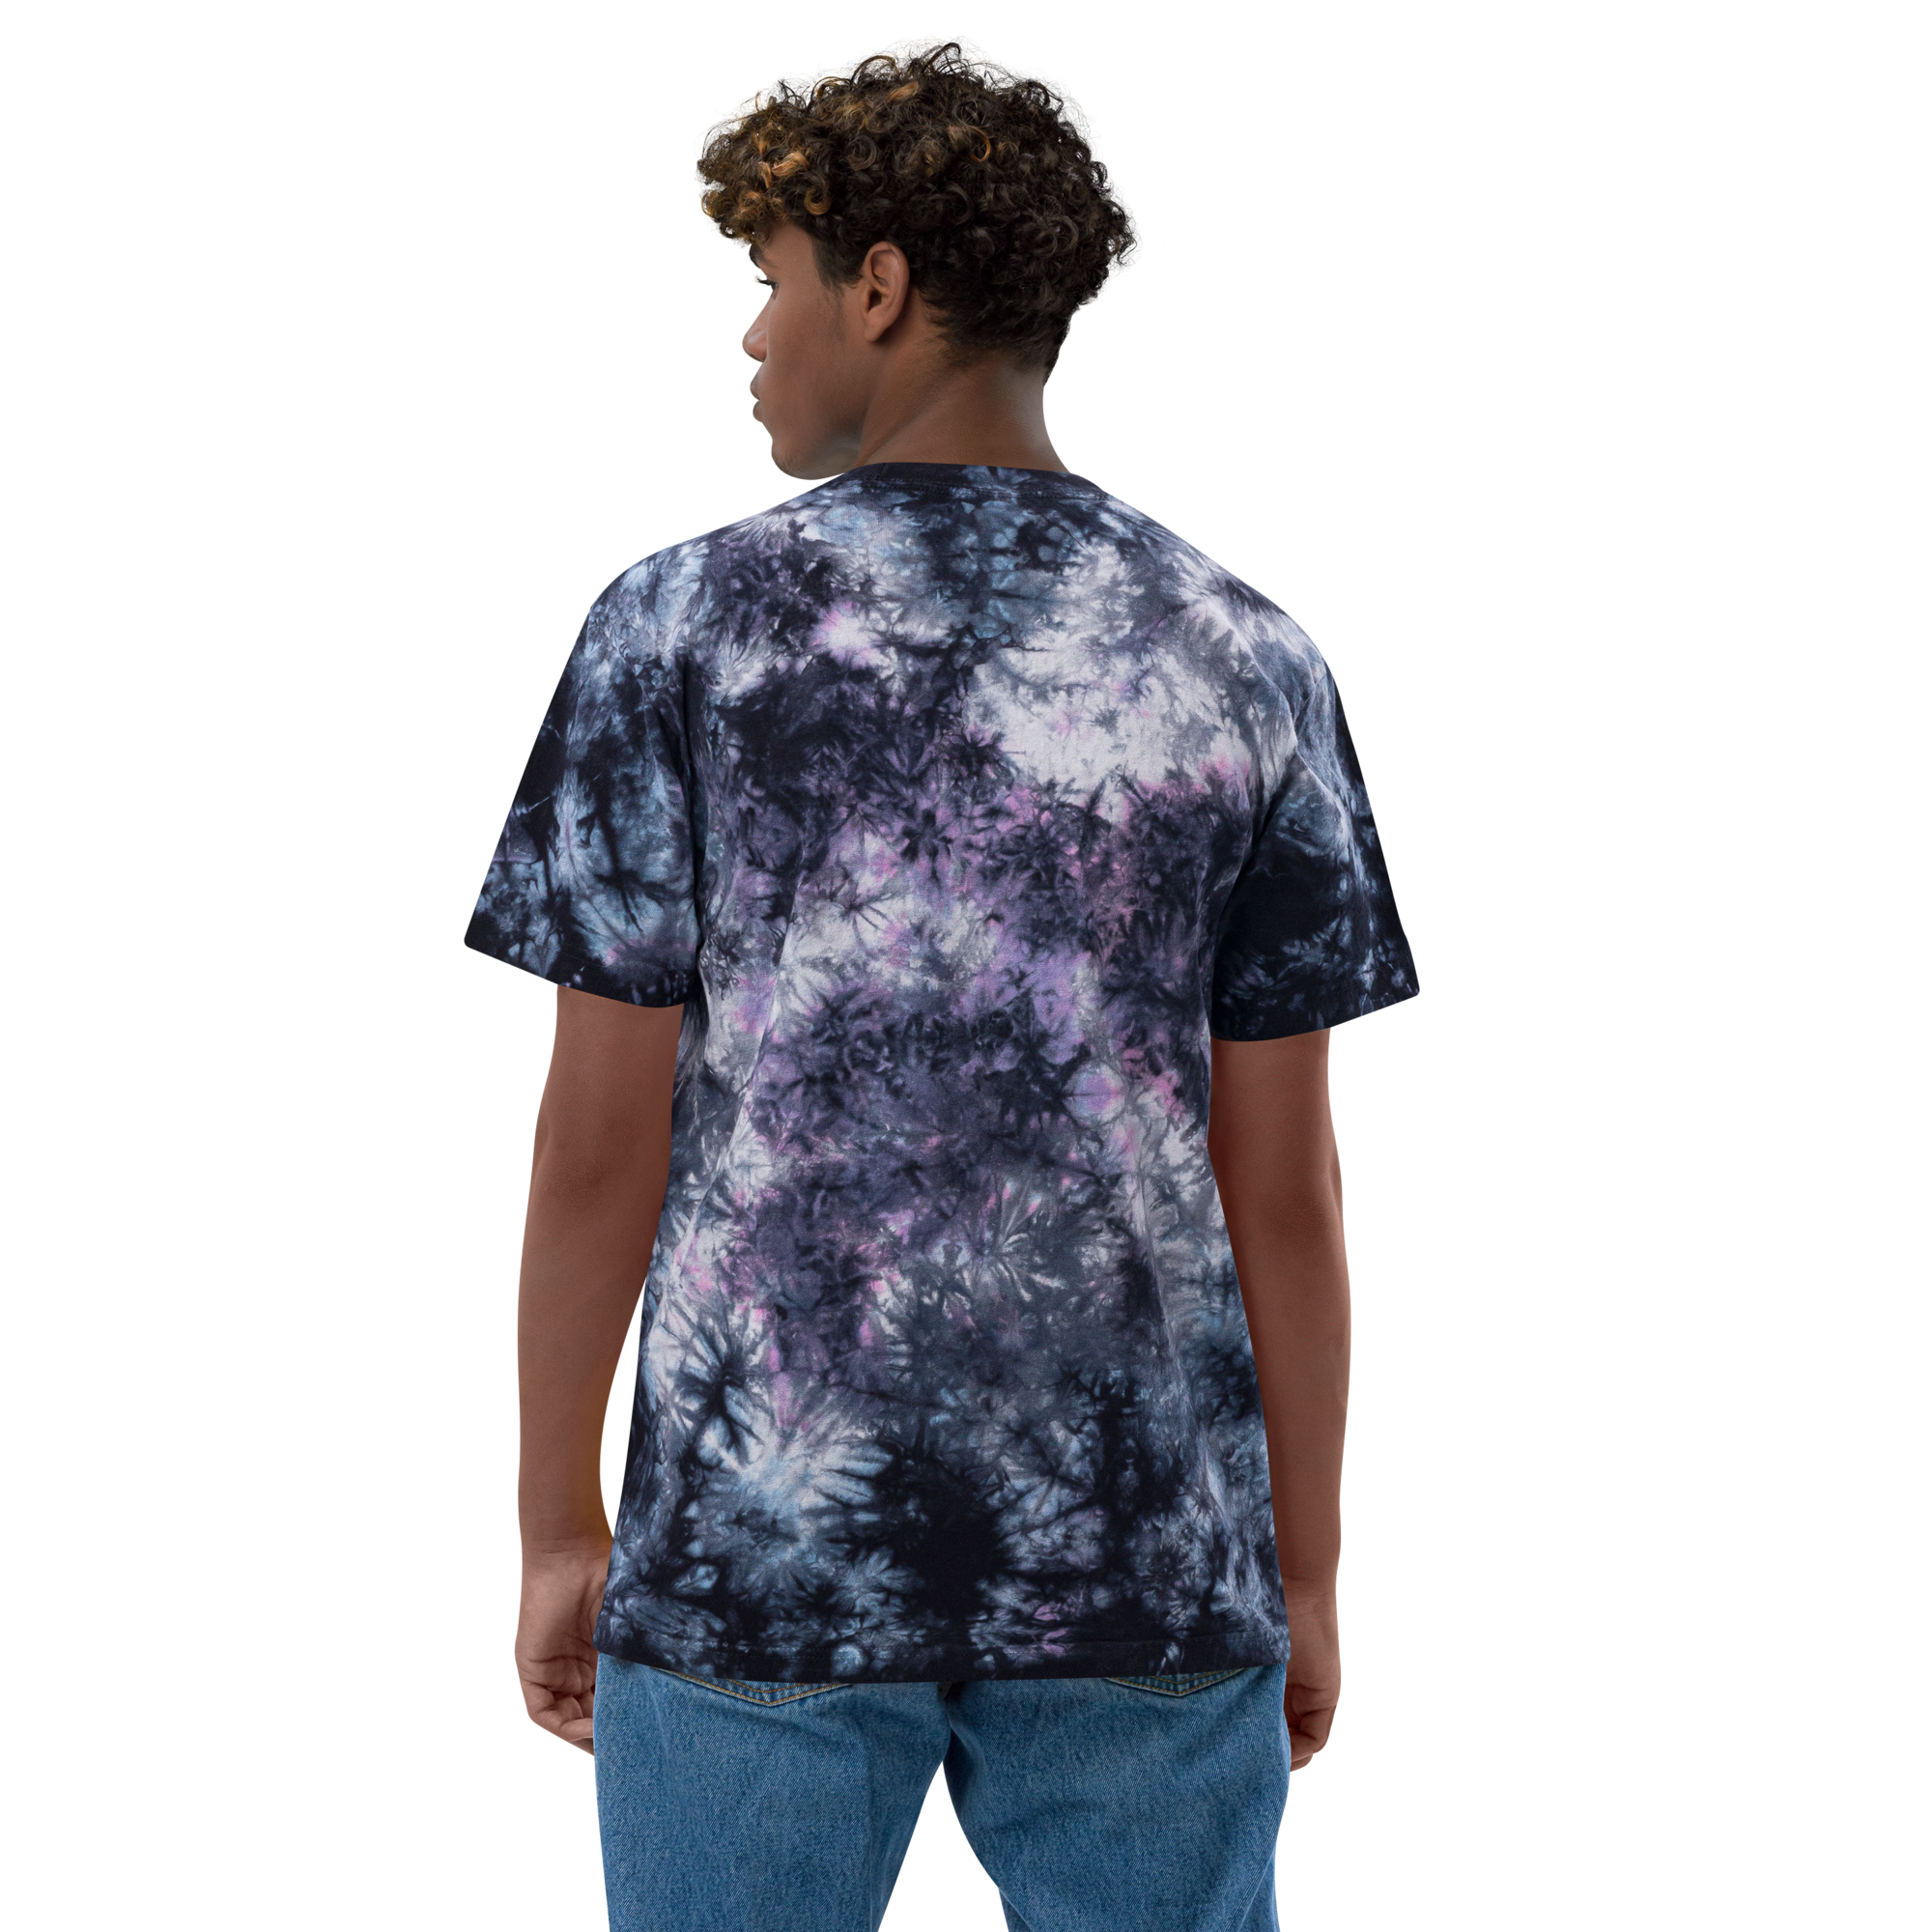 Embroidered Board Life tie-dye t-shirt